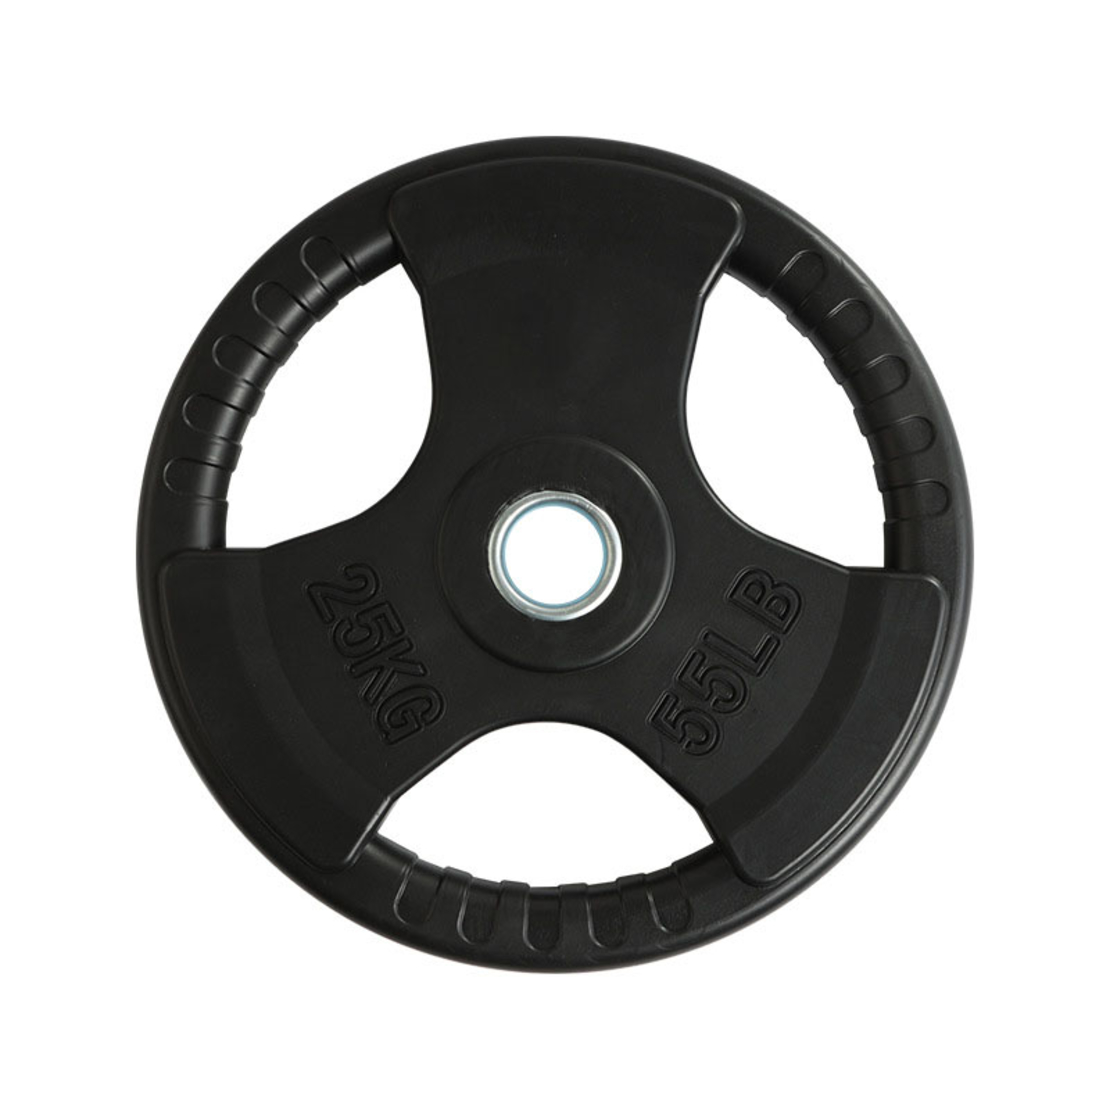  weight plate 5 kg